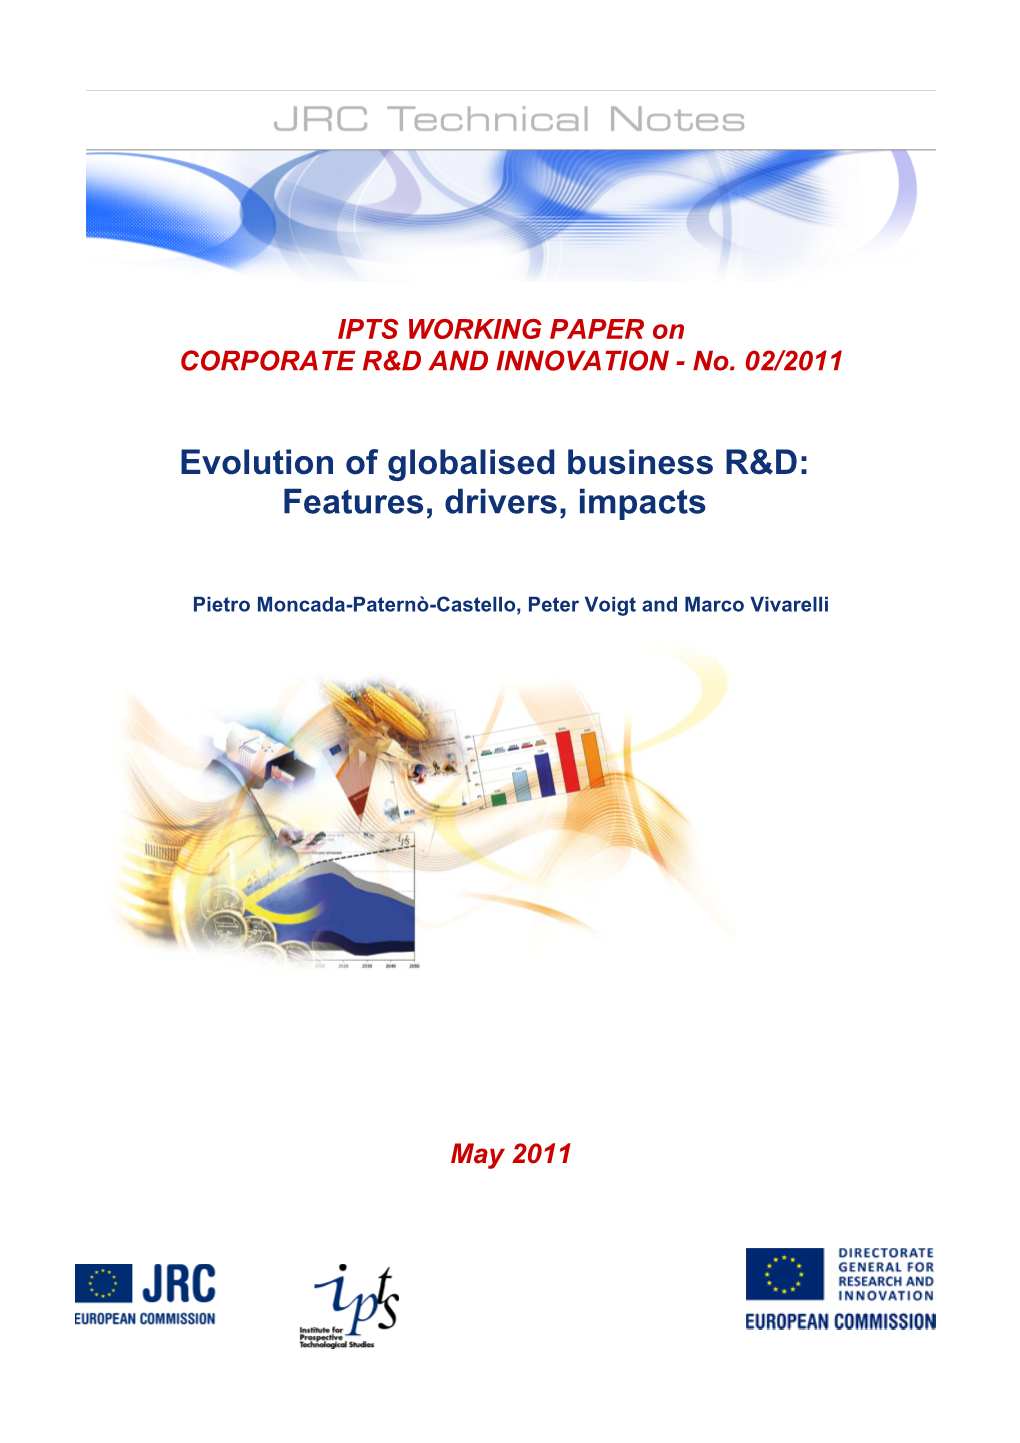 Evolution of the Globalised Business R&D: Features, Drivers, Impact